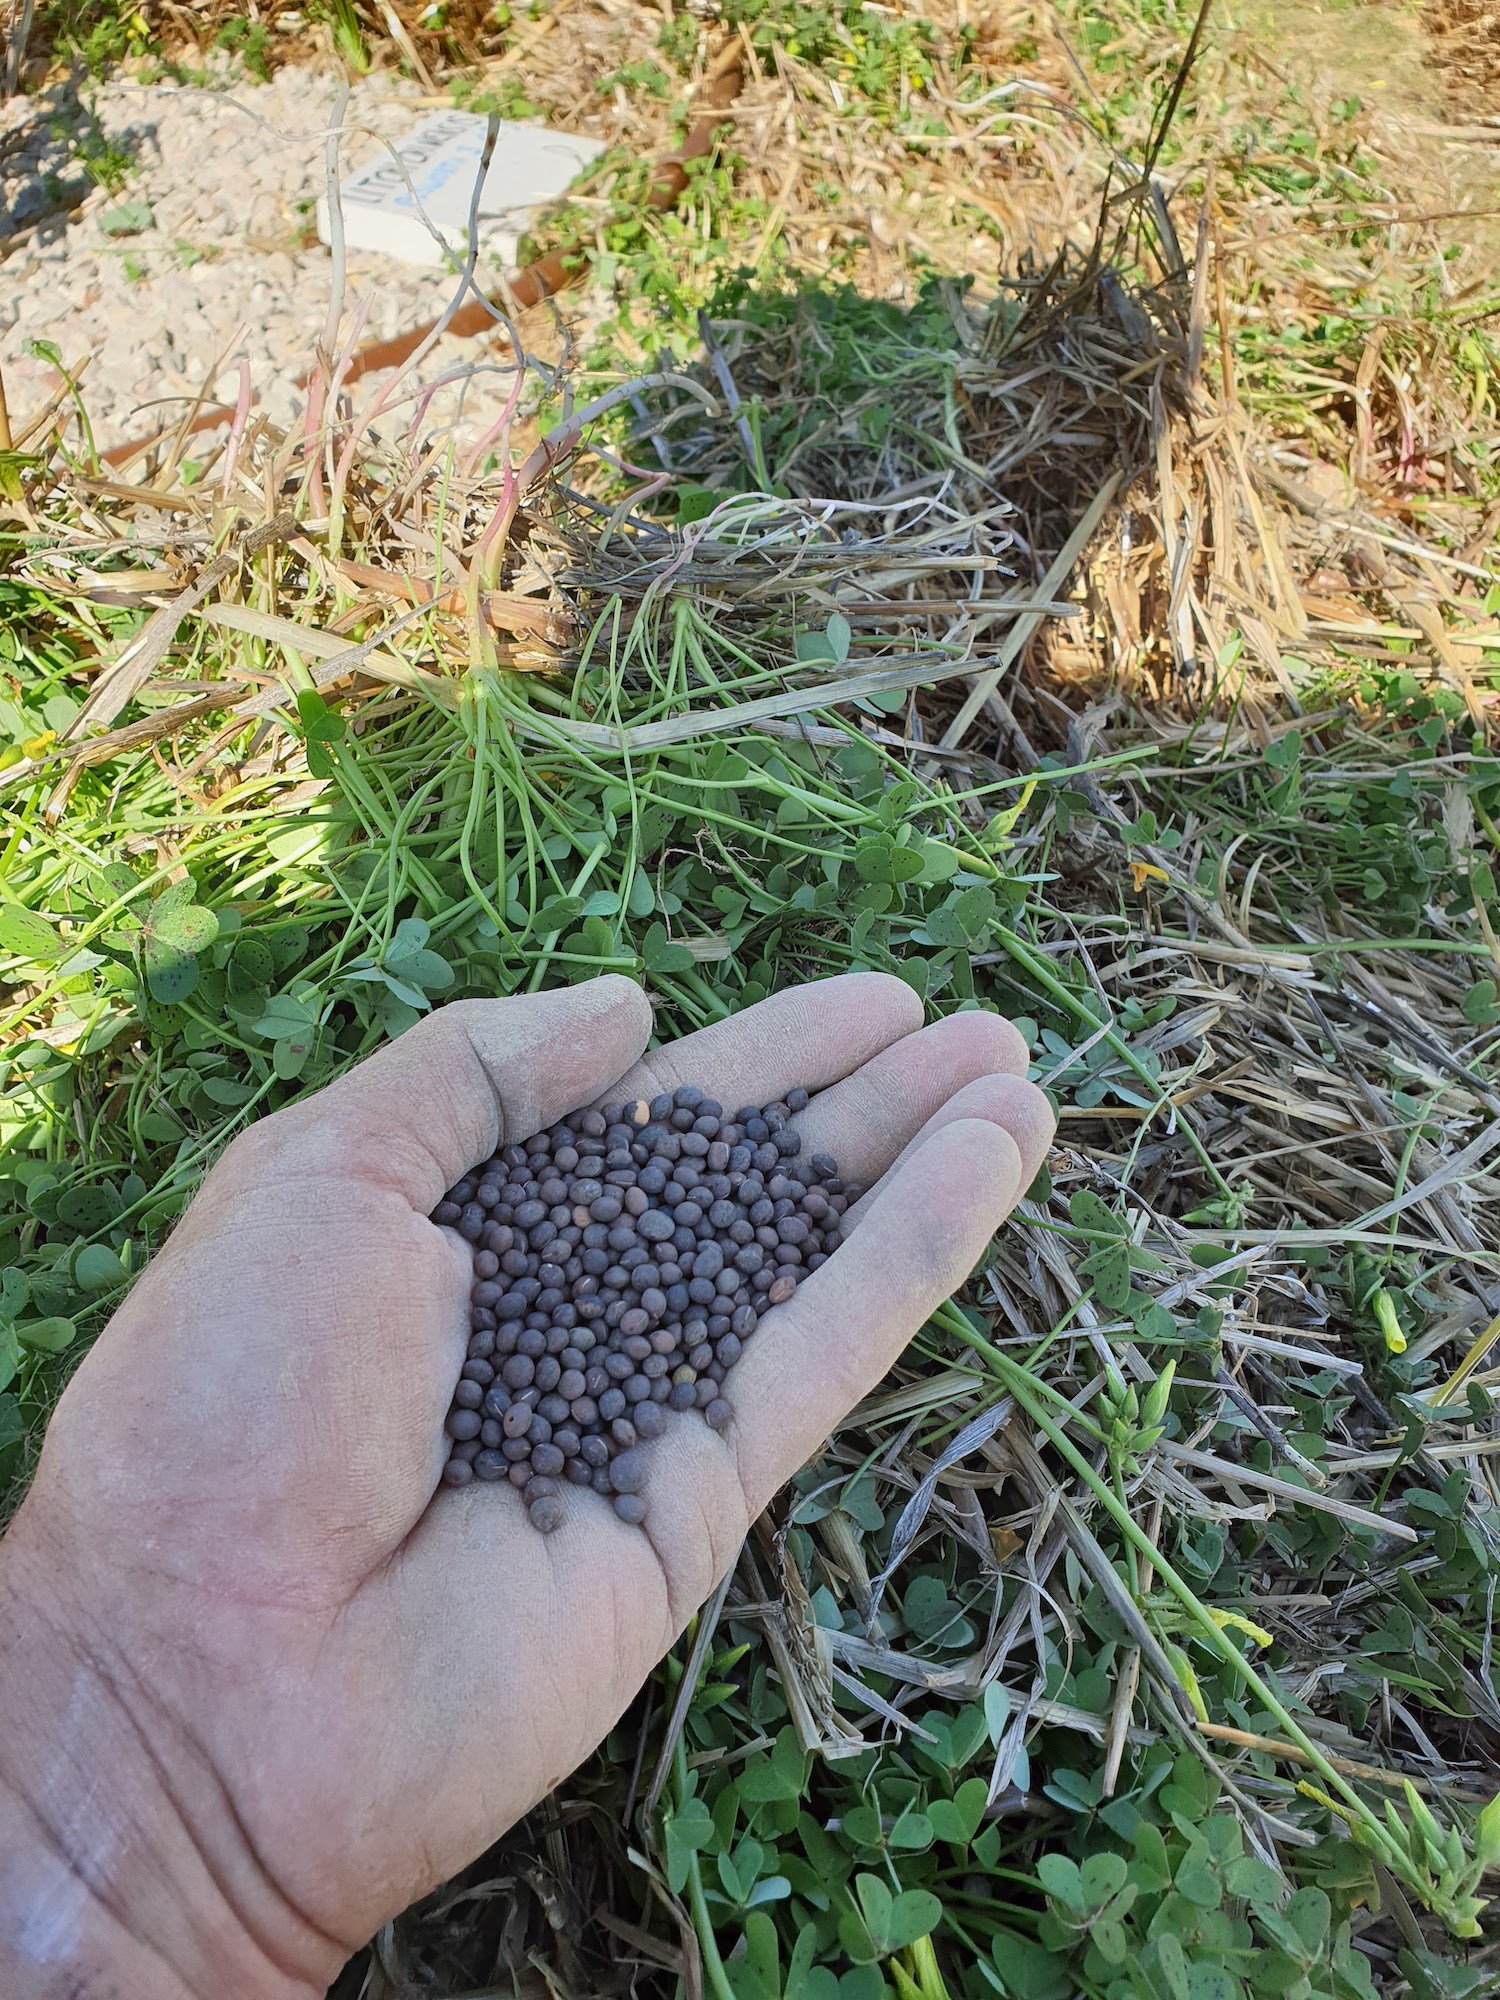 Fertilizing with green manure